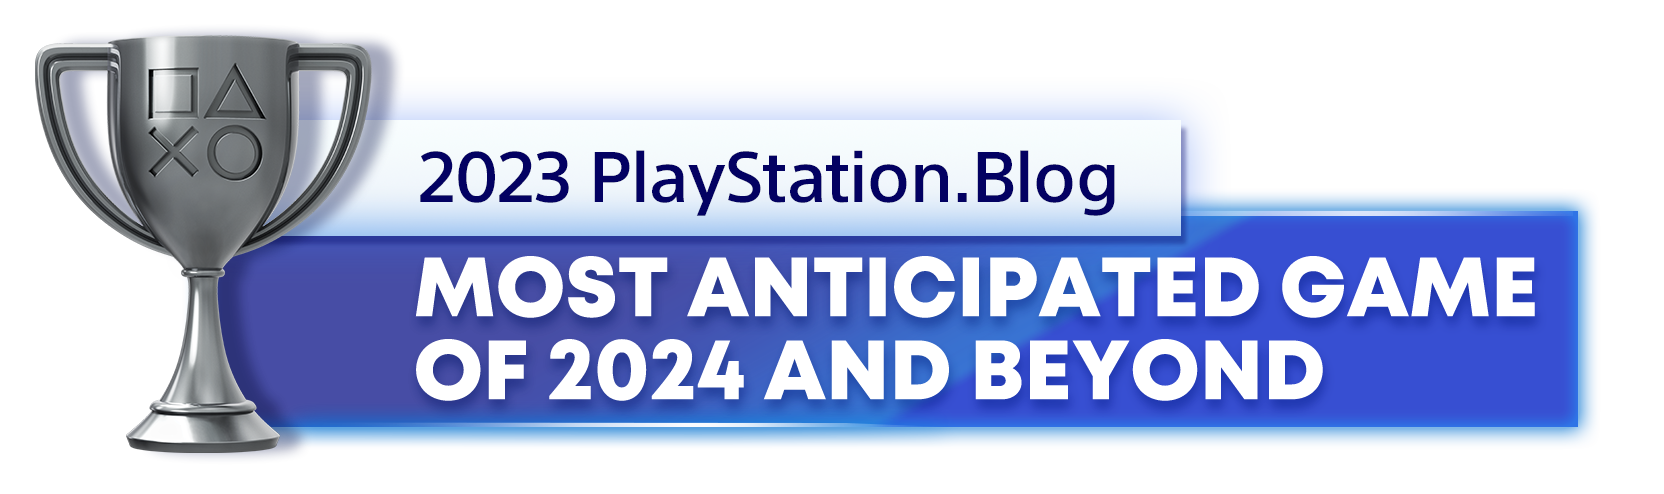  " Silver Trophy for the 2023 PlayStation Blog Most Anticipated PlayStation Game of 2024 and Beyond Winner"